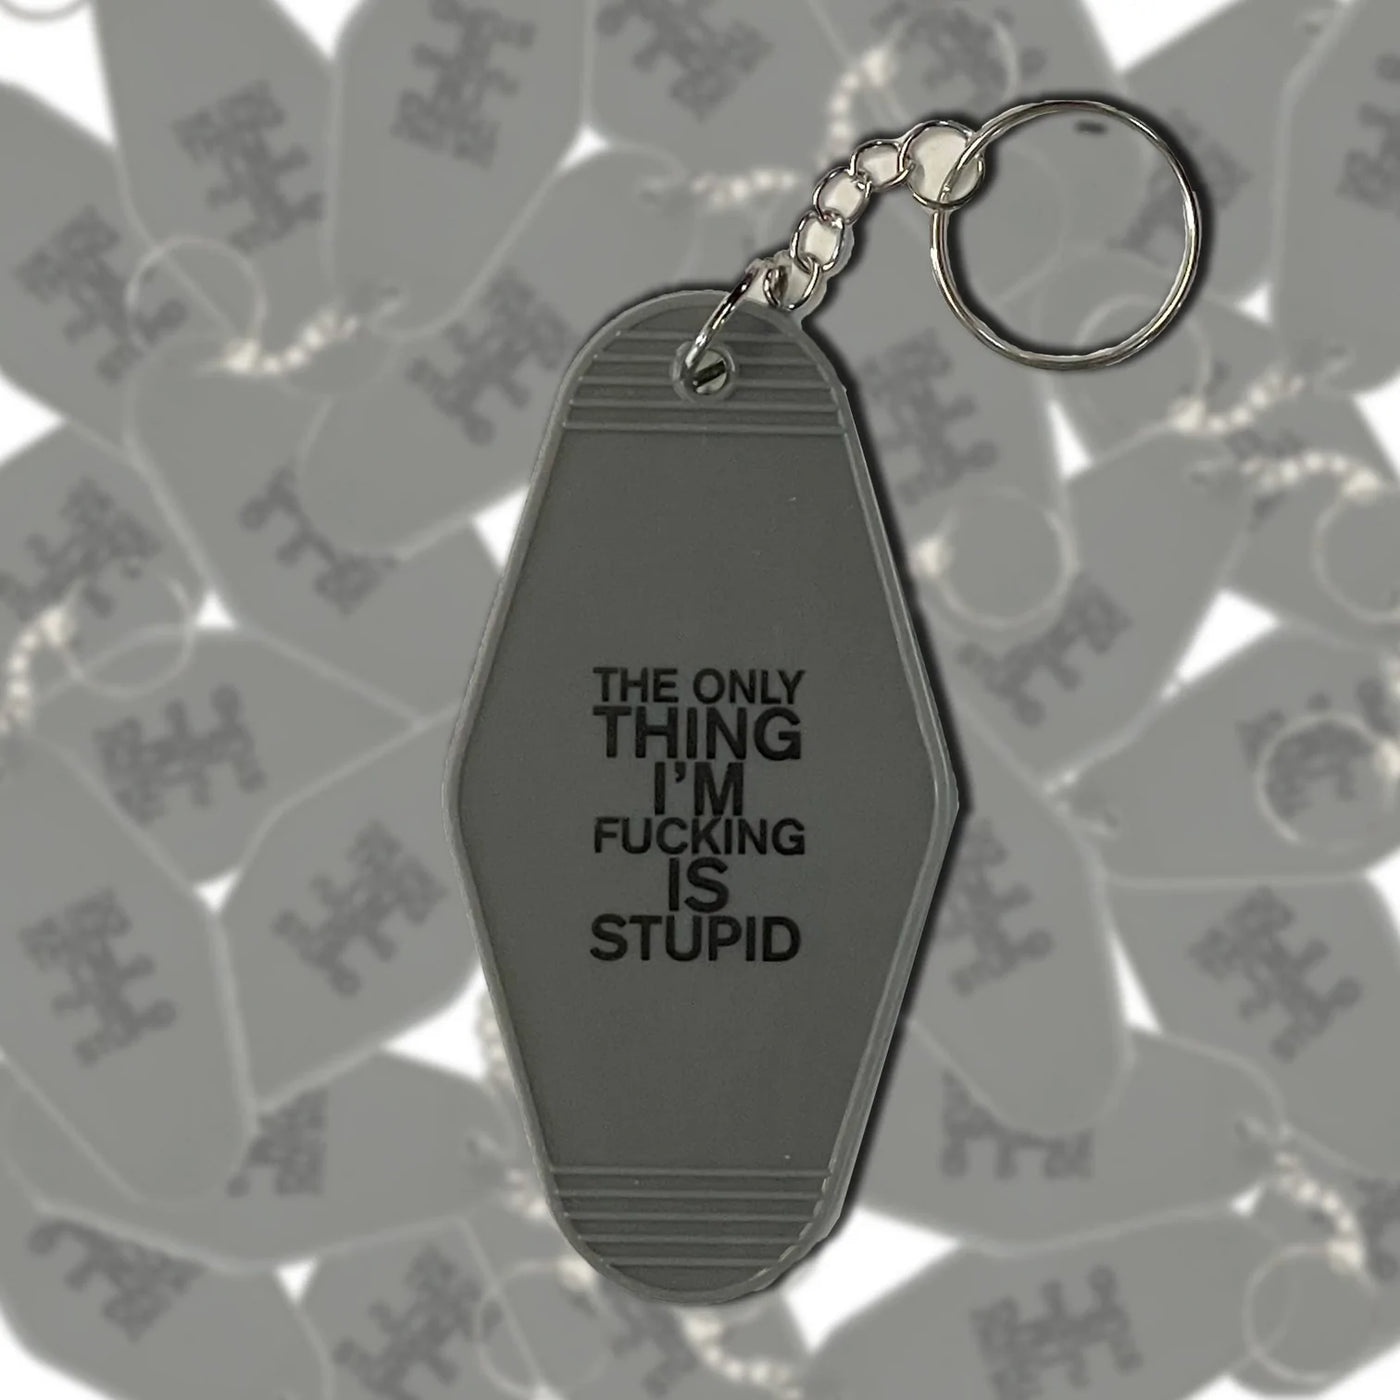 The Only Thing I'm Fucking Is Stupid Keychain